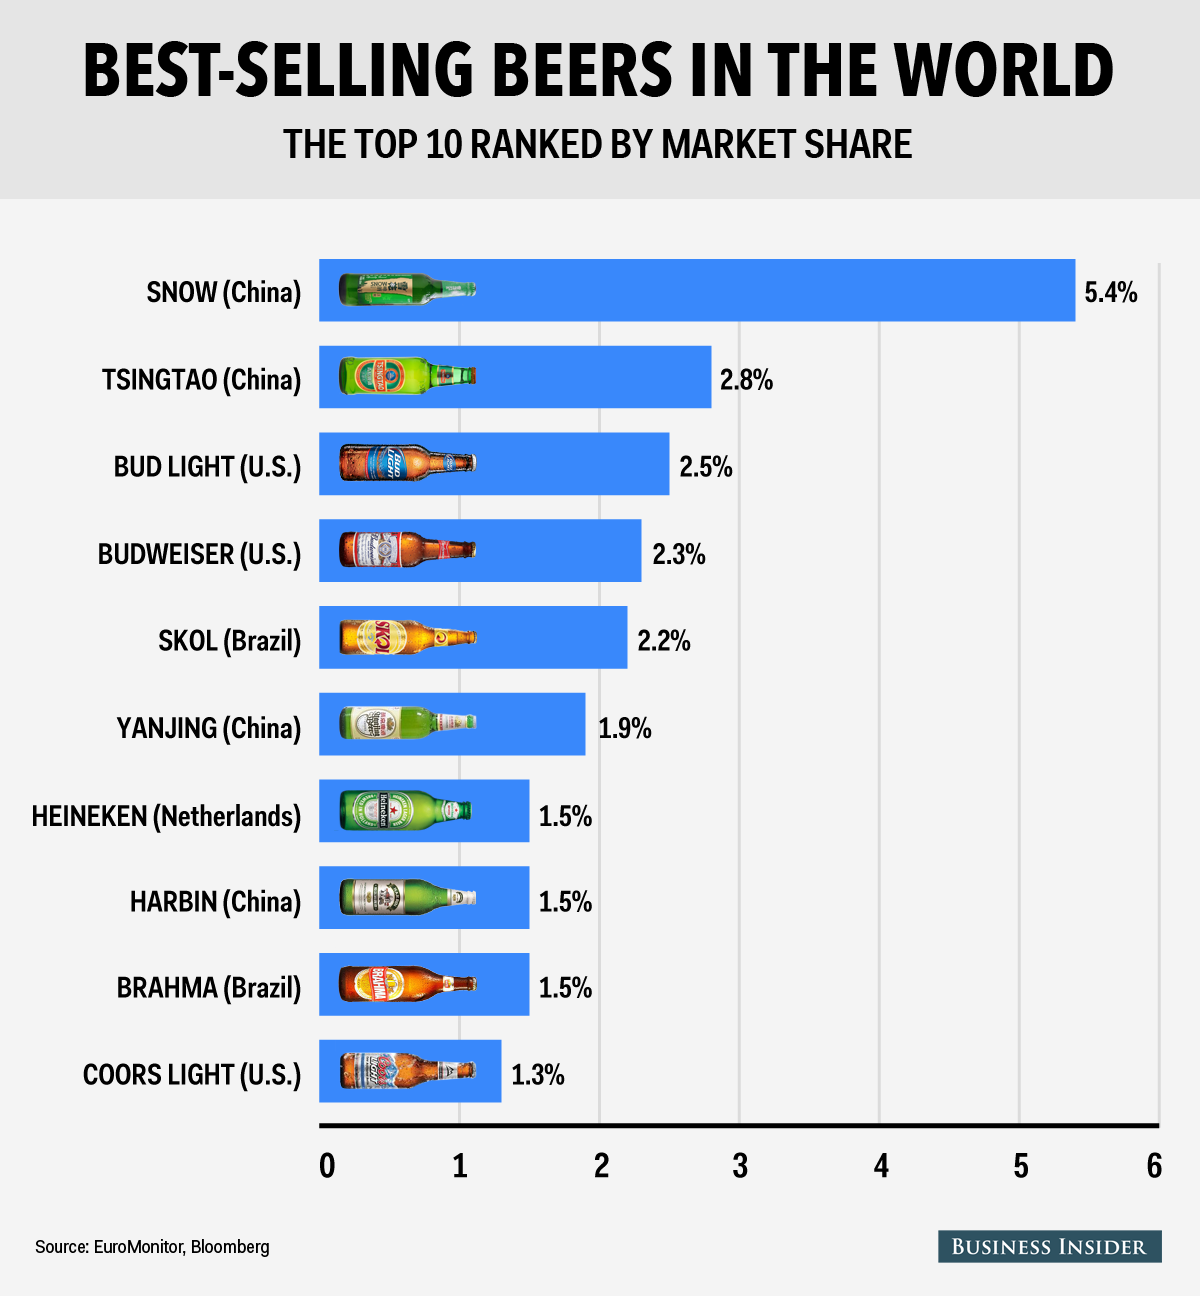 The bestselling beers in the world aren't what you think